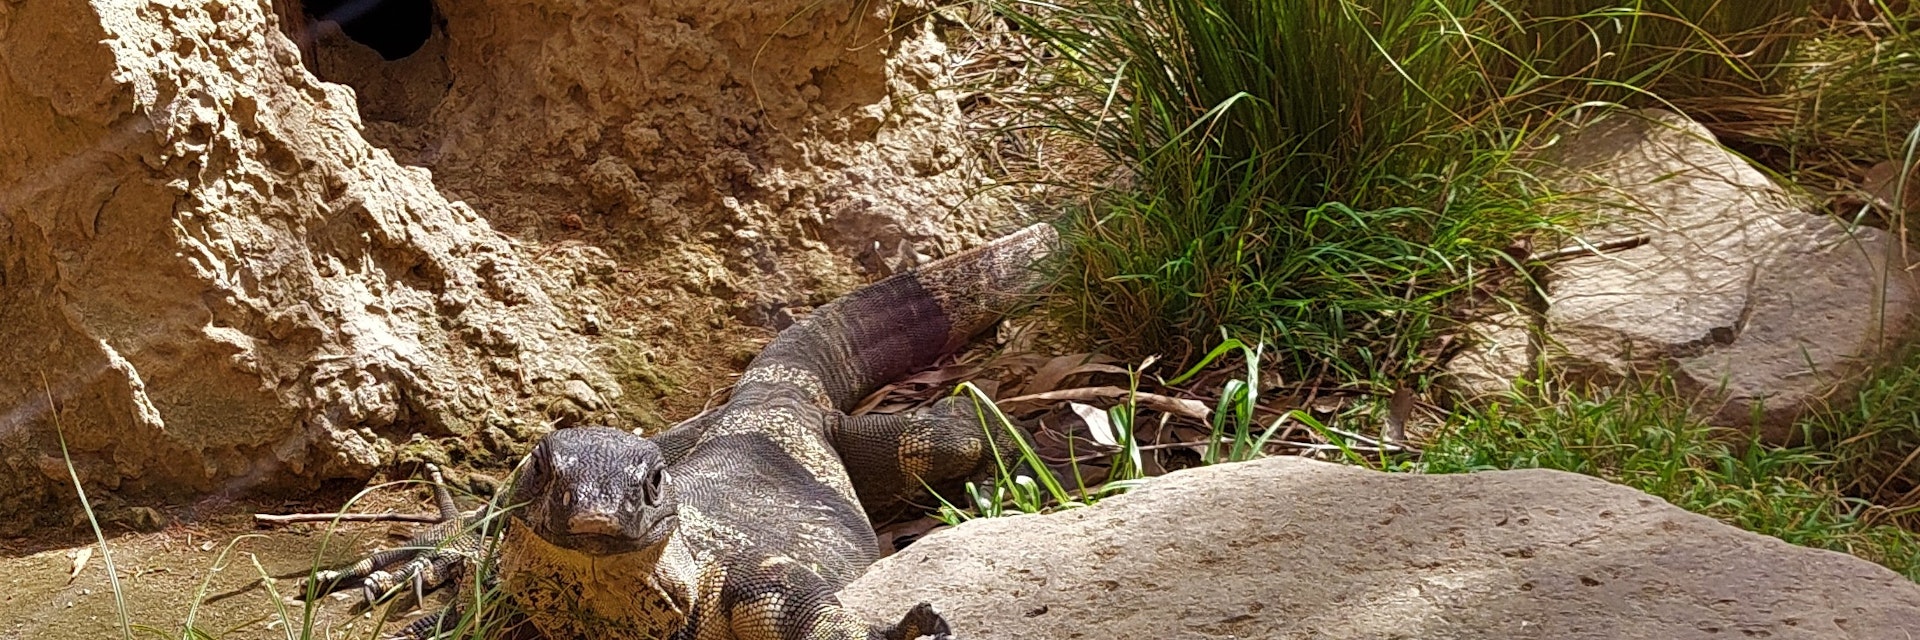 A large lizard in its enclosure at the Auckland Zoo, New Zealand.